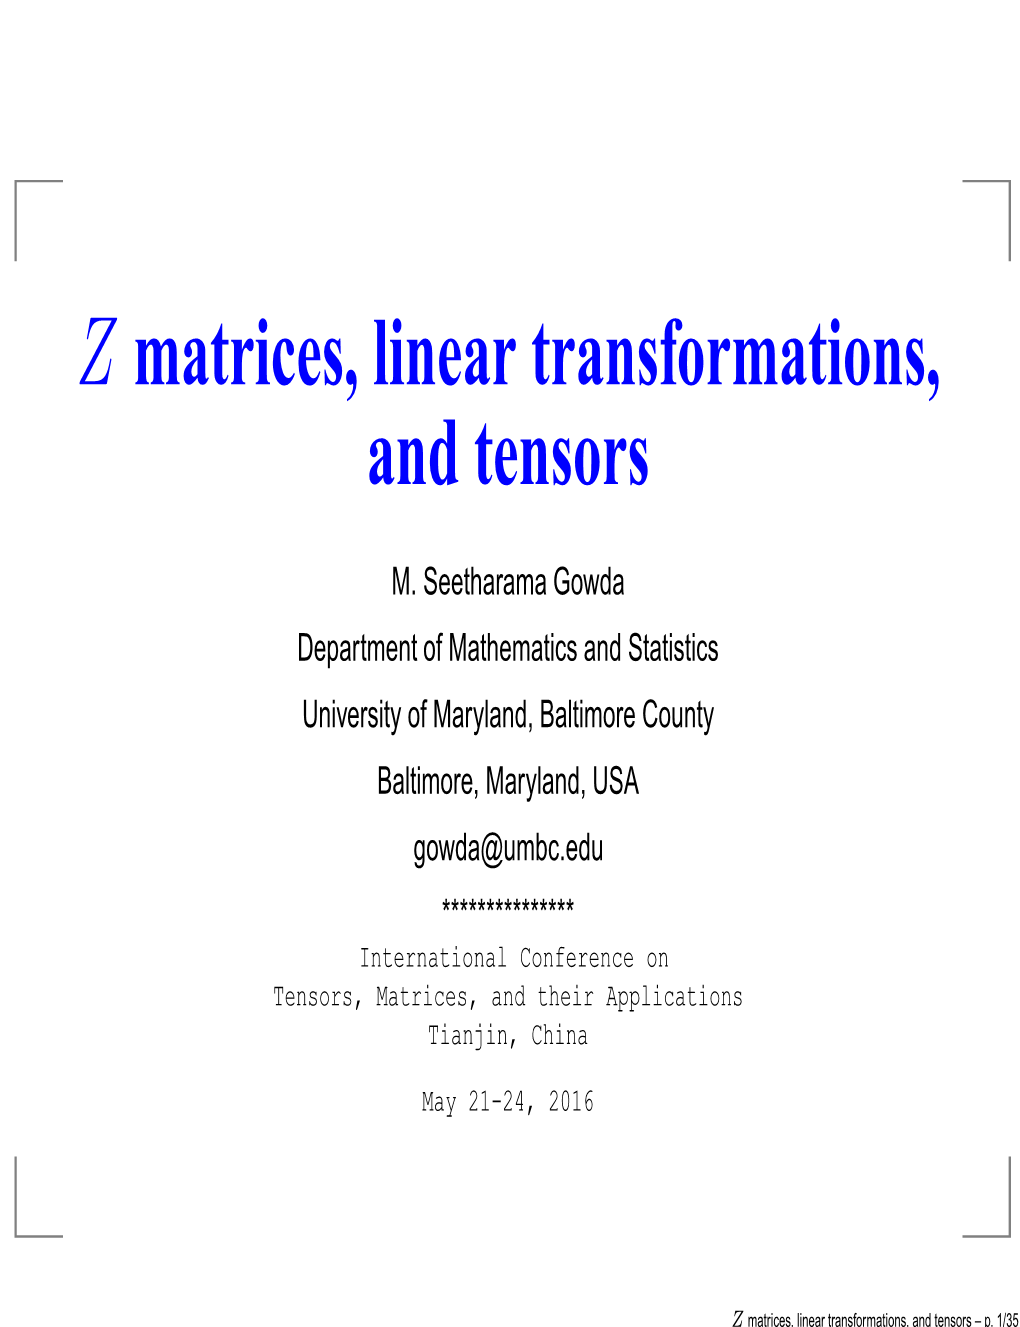 Z Matrices, Linear Transformations, and Tensors